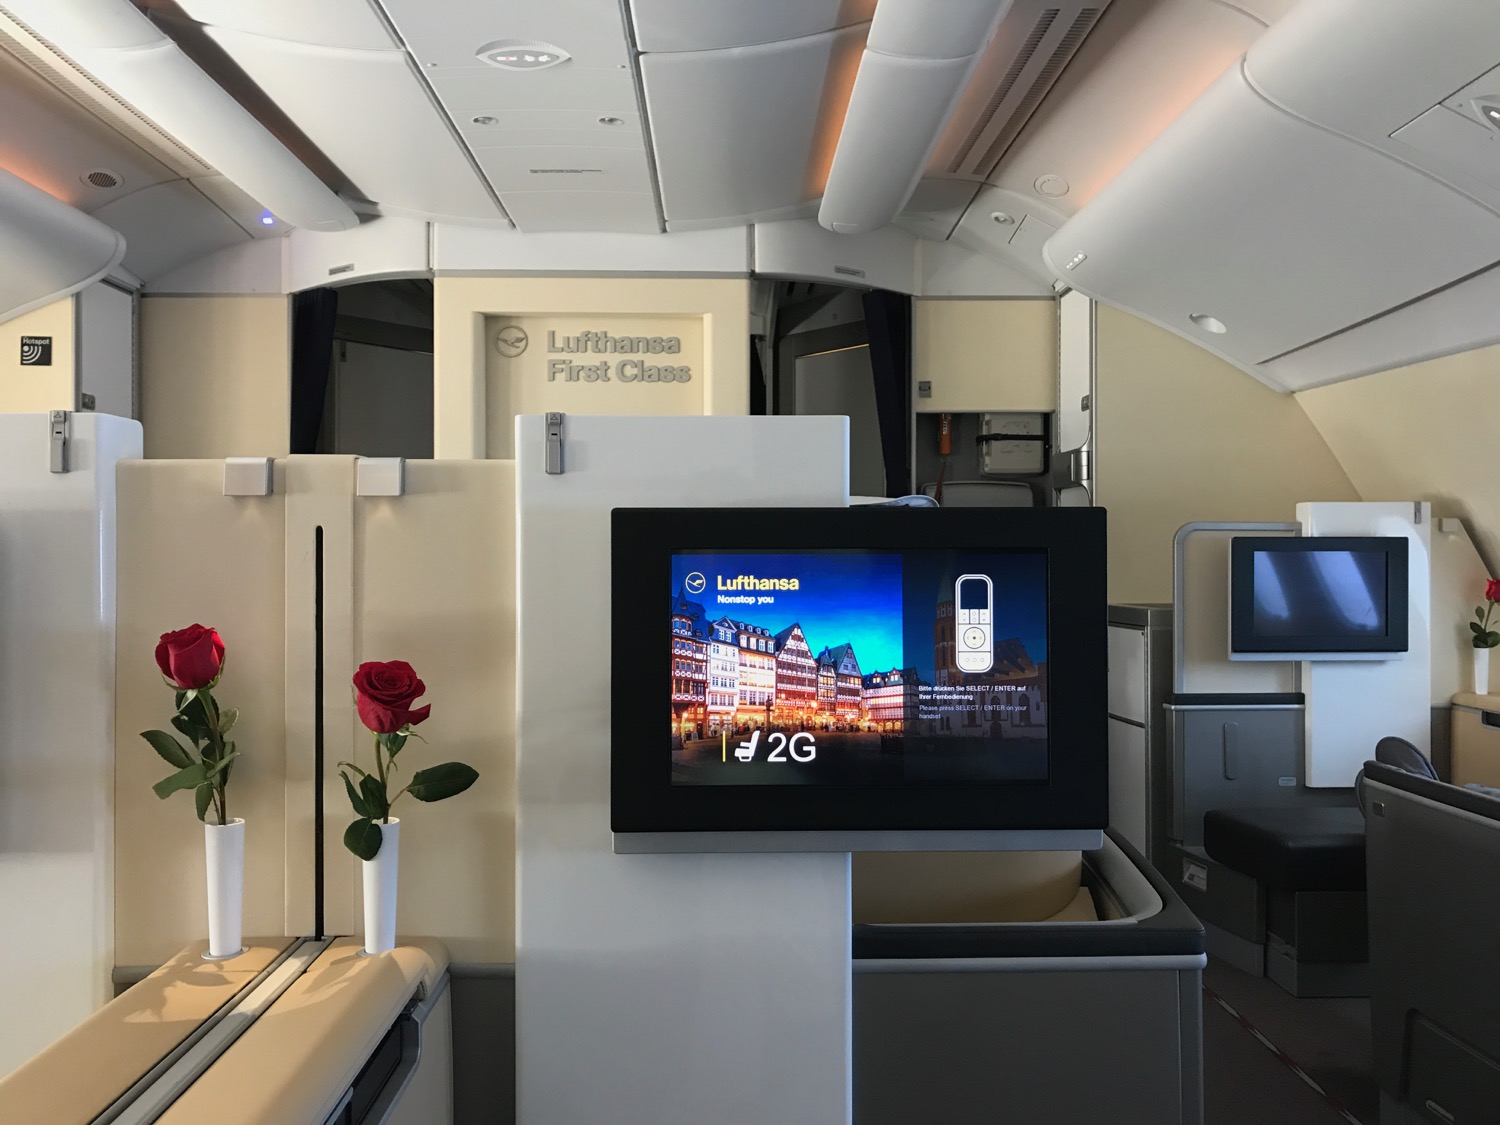 a tv on a stand in an airplane